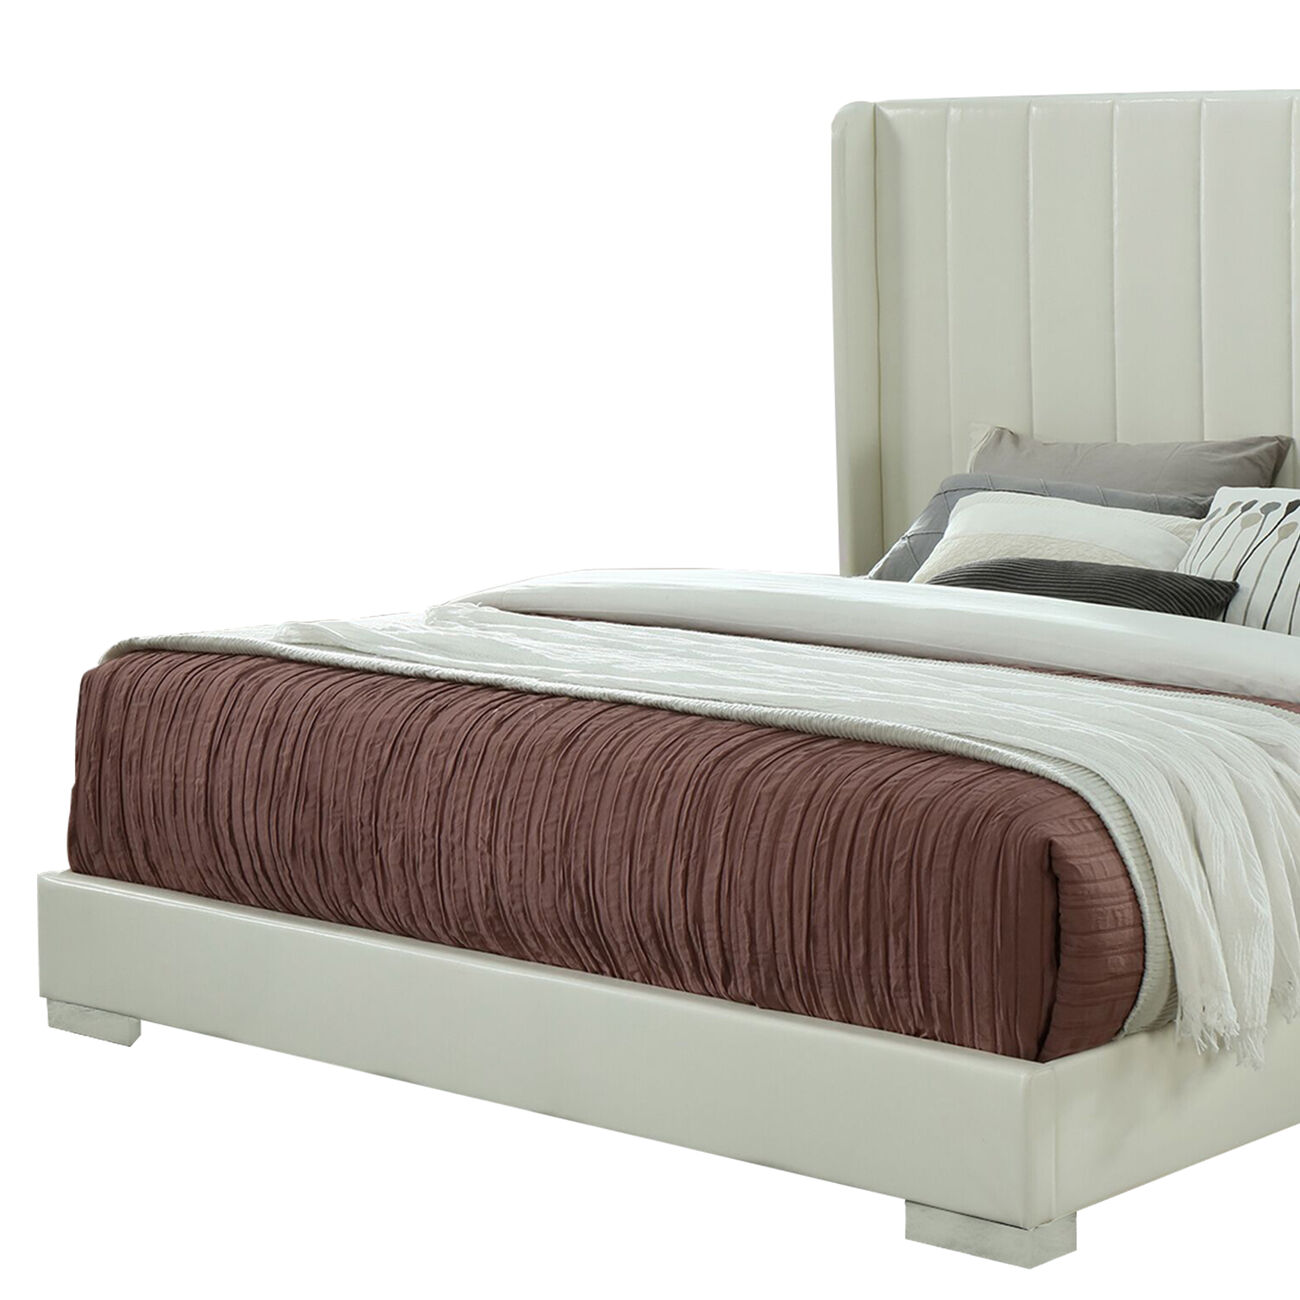 Vertical Stitched Woven Leatherette Wooden Frame Queen Bed, White